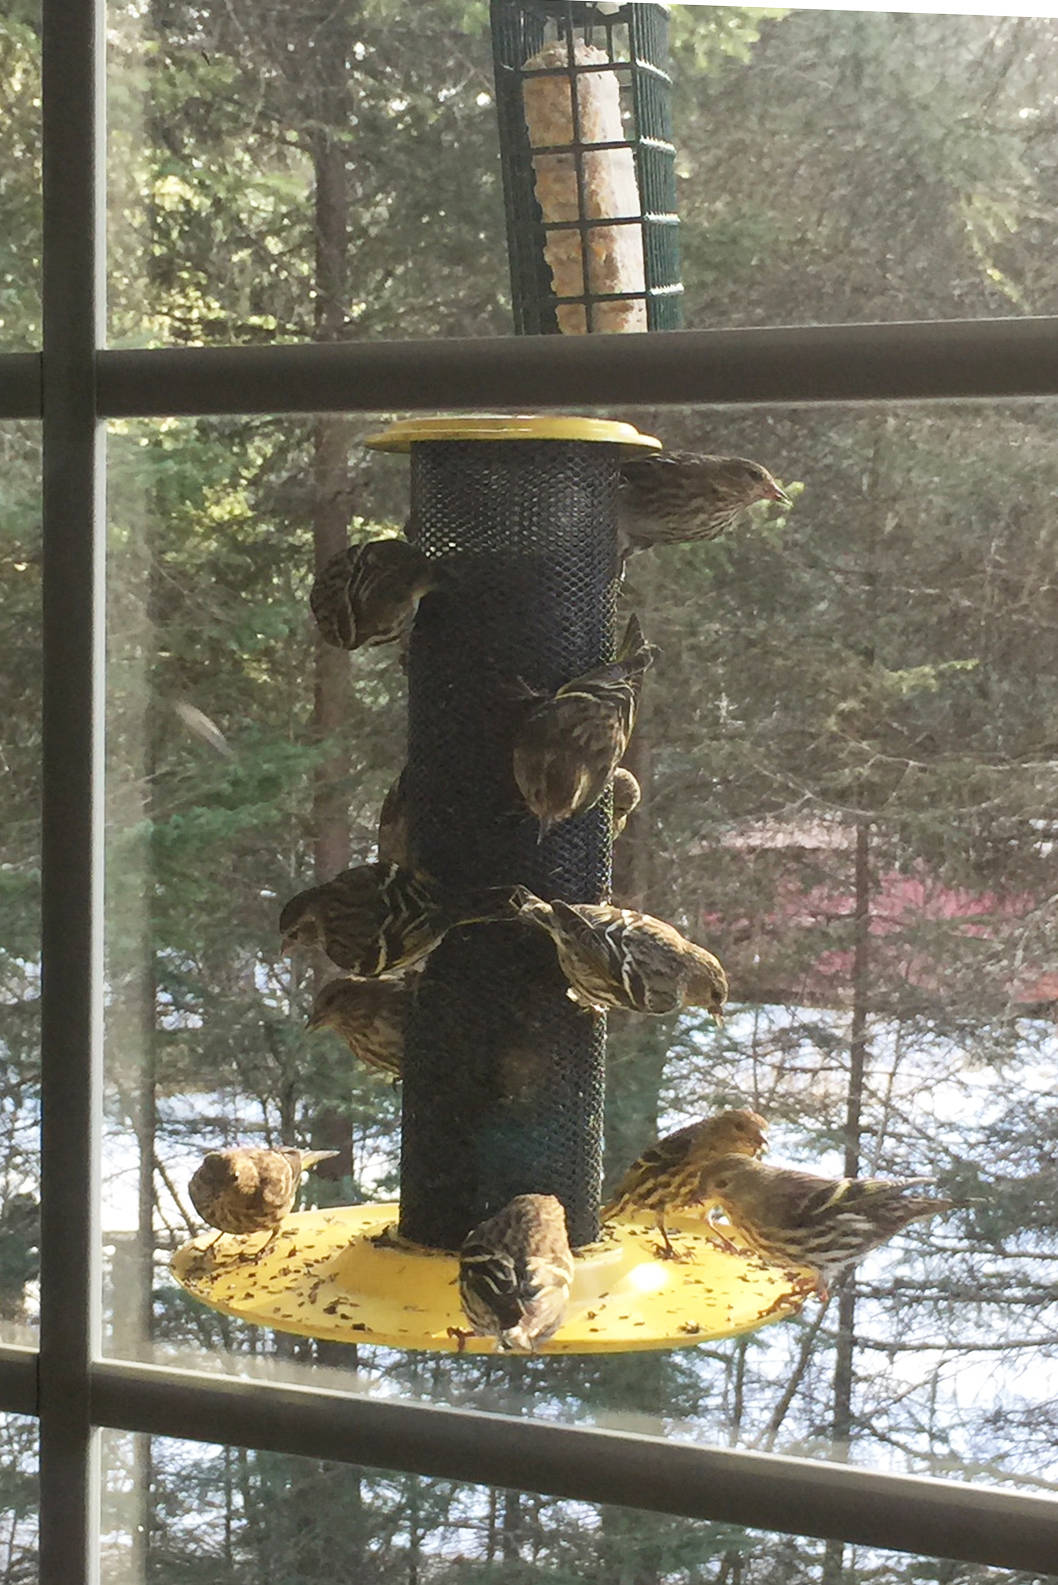 Pine siskins and red polls feed at a Homer, Alaska, house in February 2018. (Photo by BJ Hitchcock)